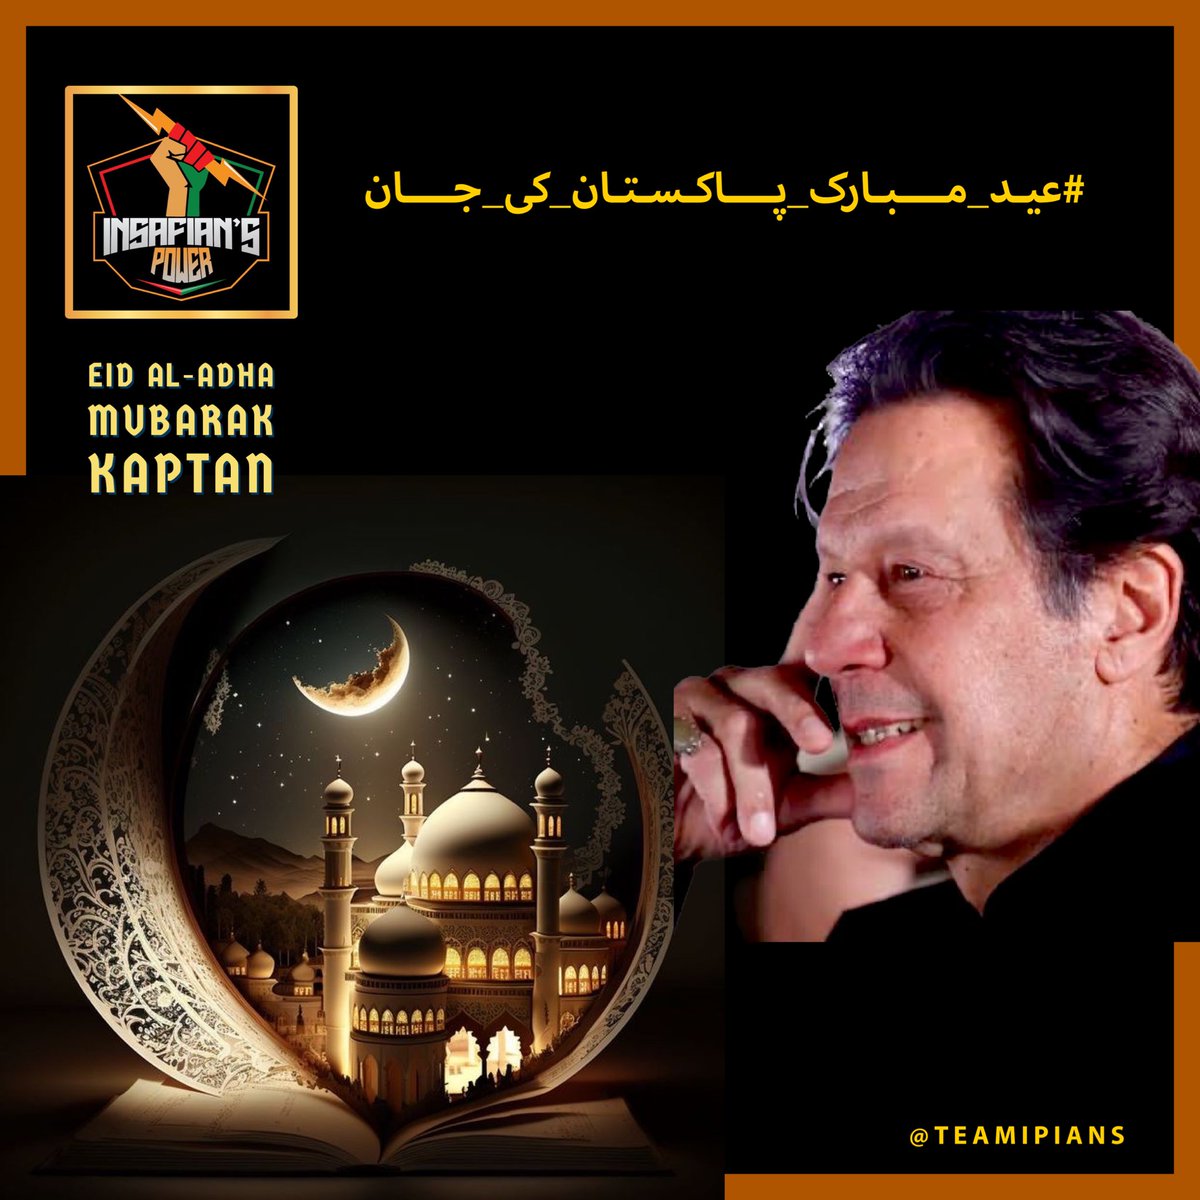 May you cherish all the happy and joyous moments with friends and family on this sacred day of Eid ul Adha. Eid ul Adha Mubarak to You!
@TeamiPians
#عید_مبارک_پاکستان_کی_جان